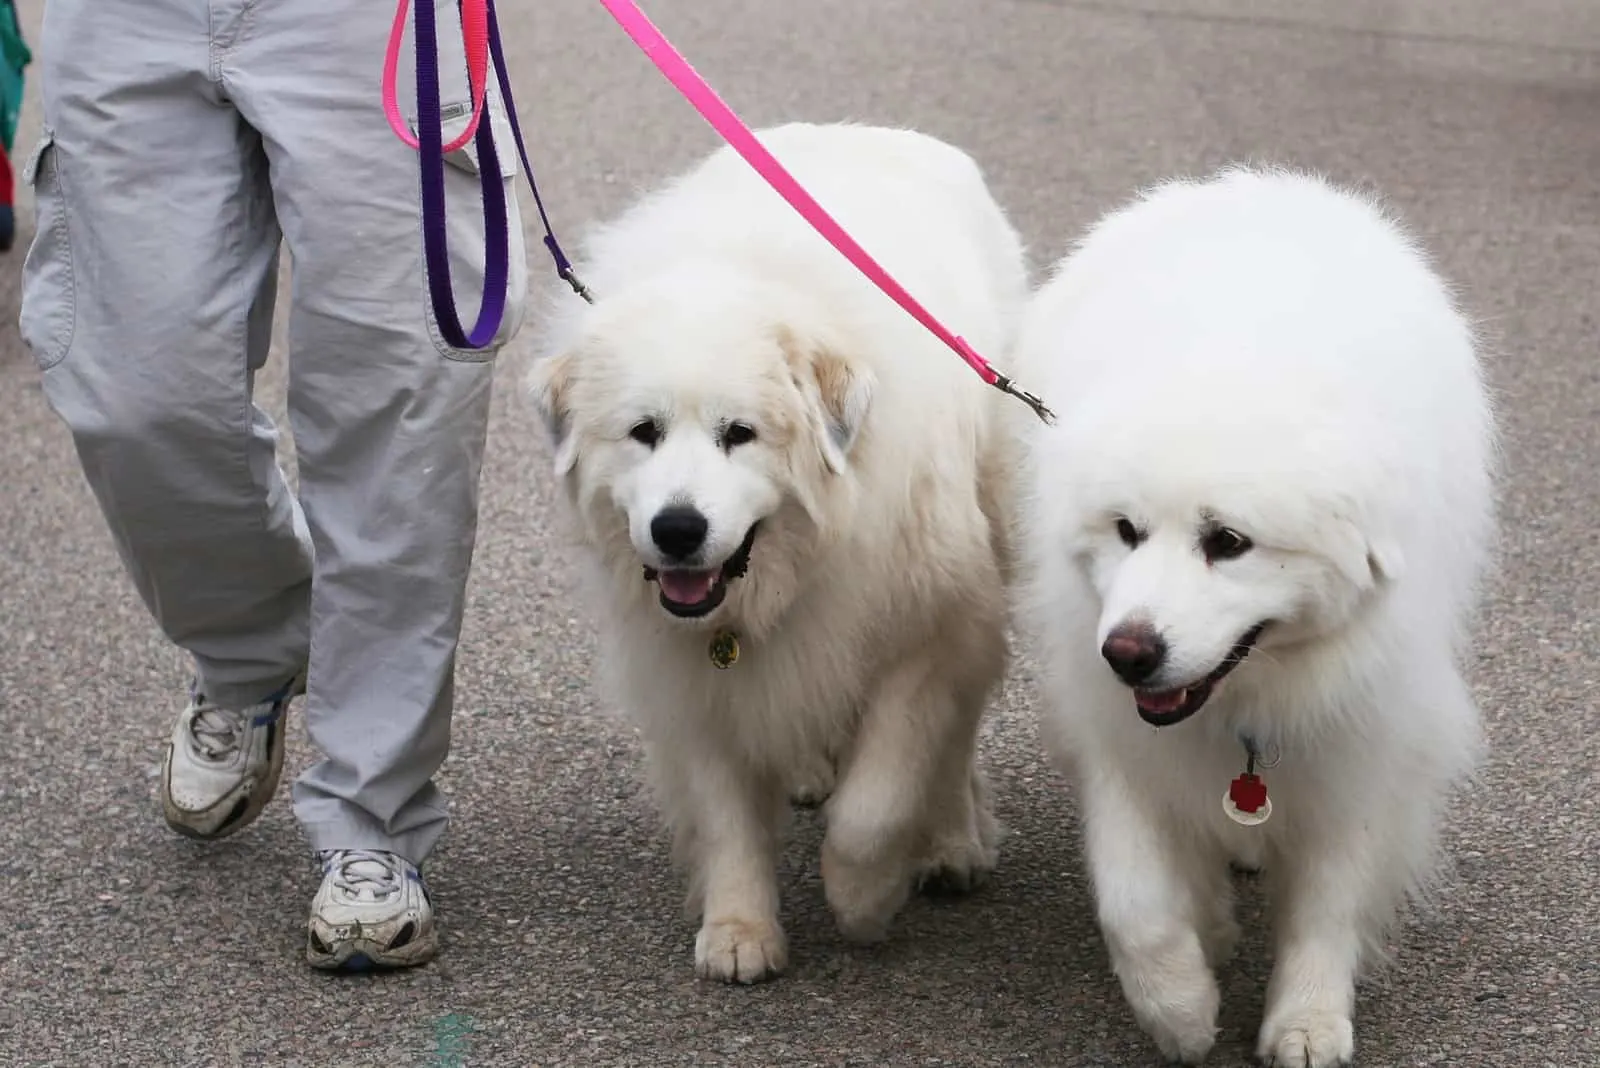 owner walking with two Great Pyrenees dogs